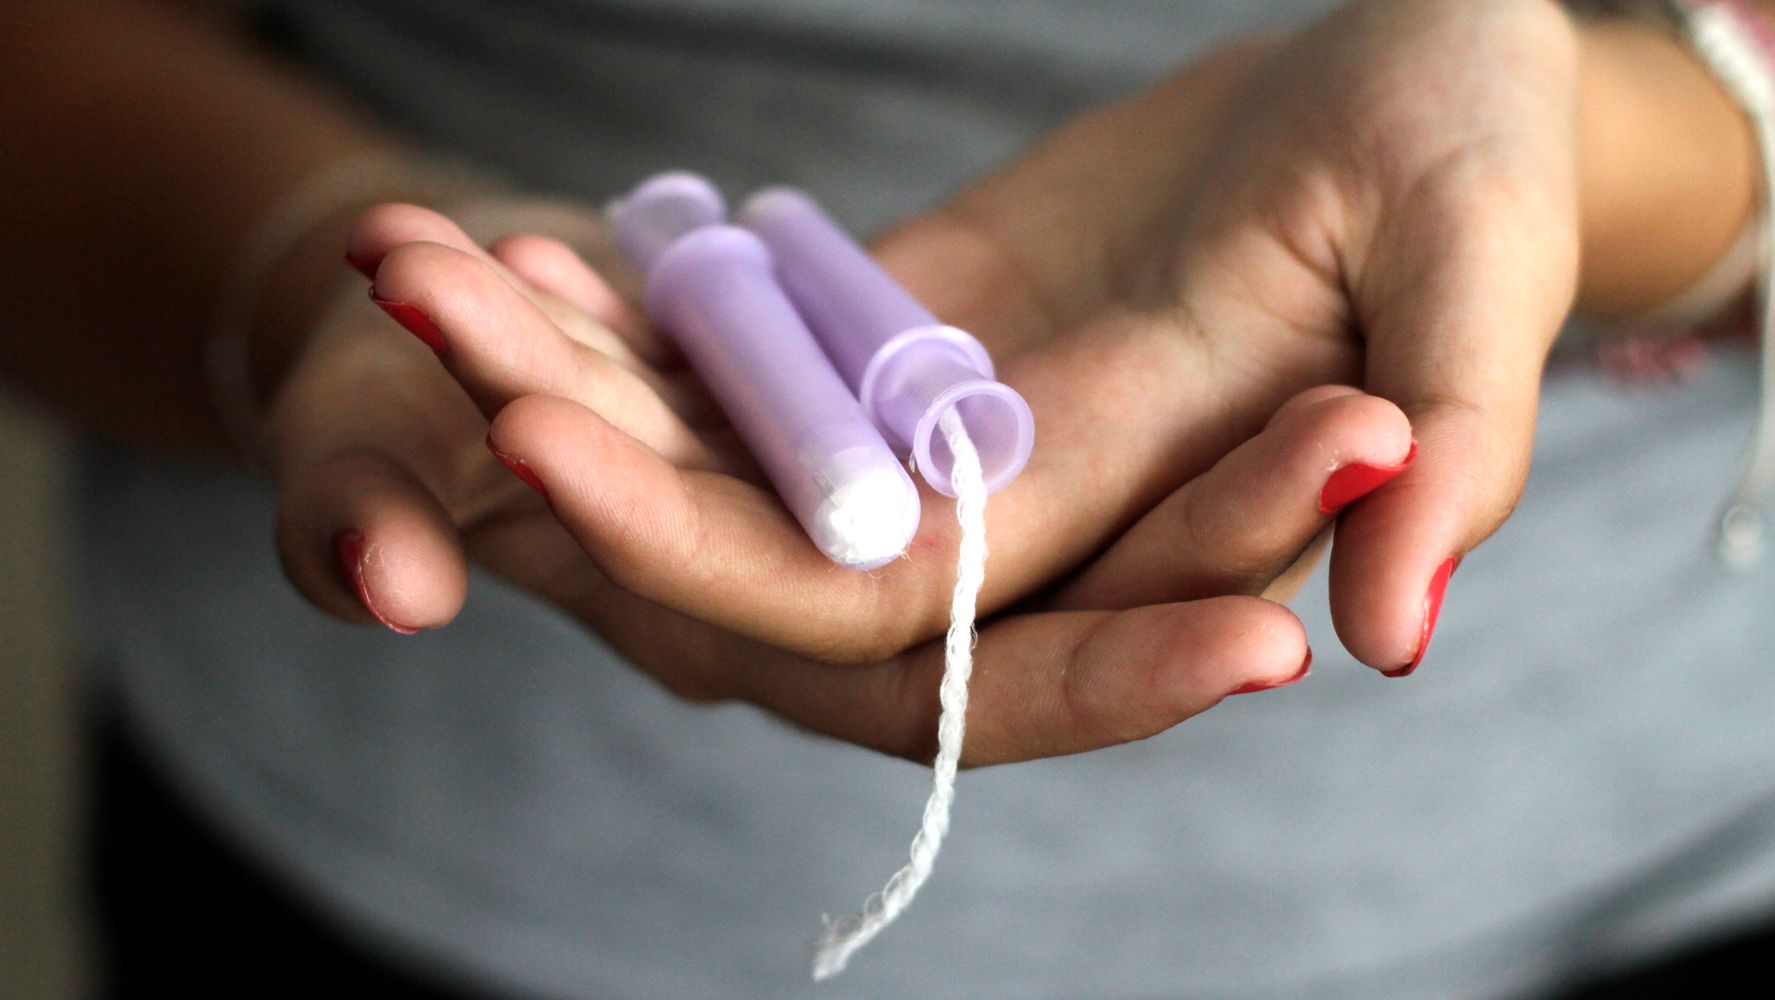 Scotland Becomes First Nation To Provide Free Pads, Tampons In Public Bathrooms